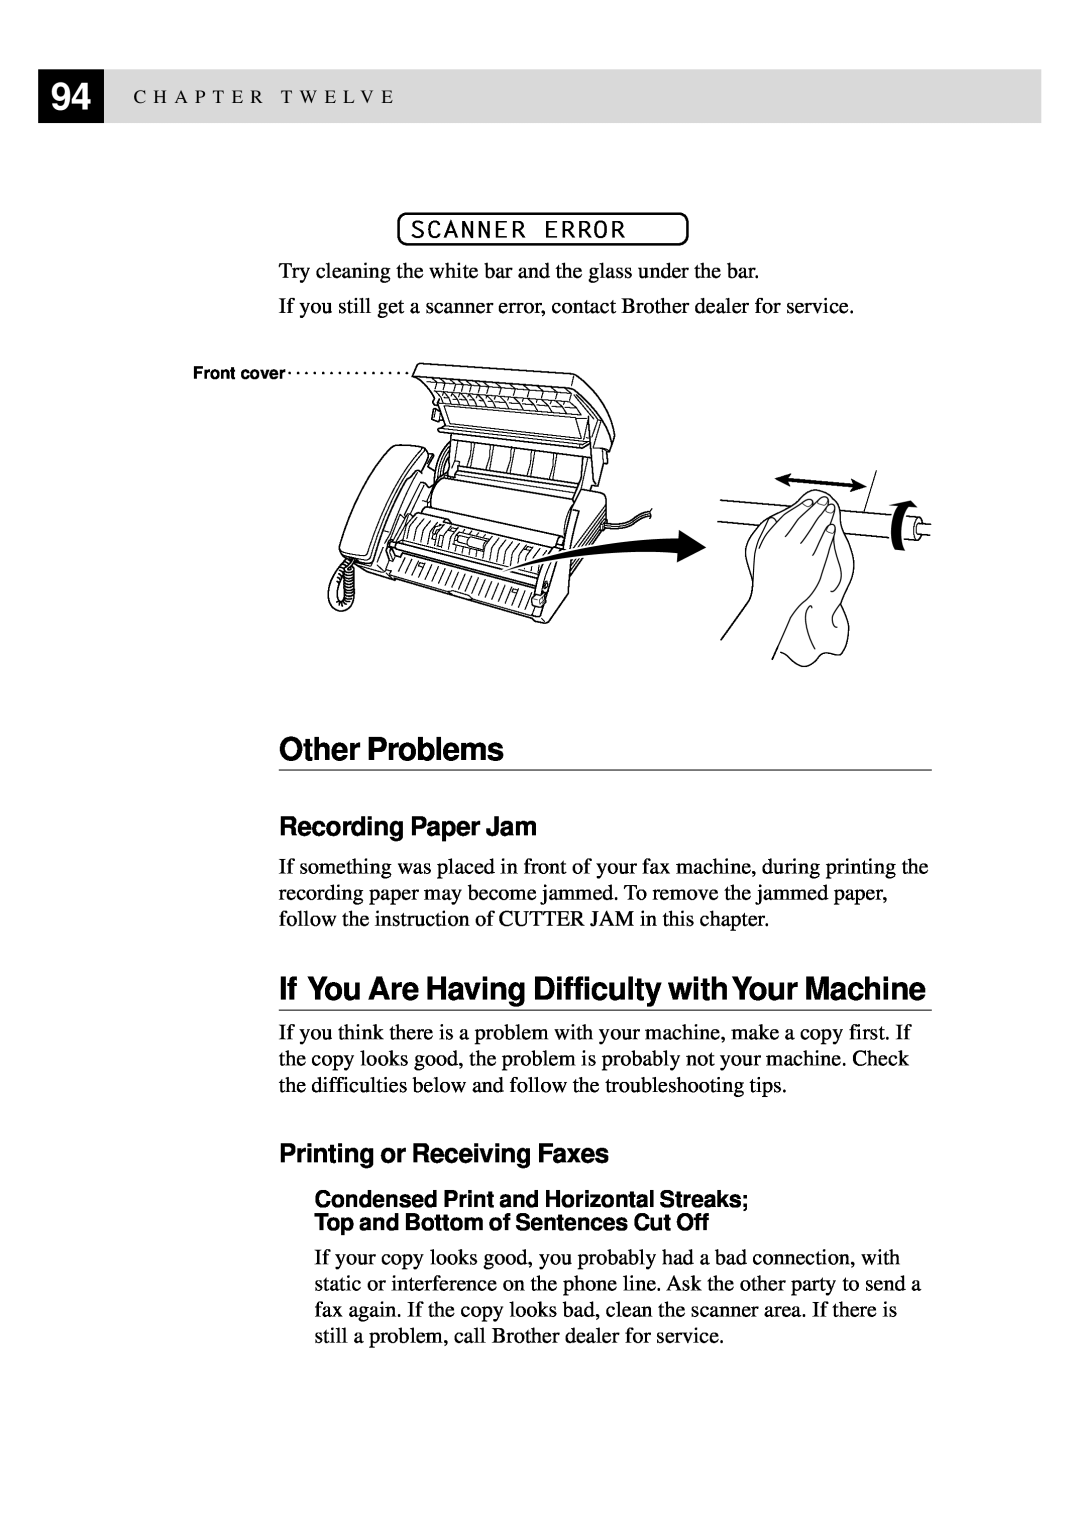 Brother 515 manual Other Problems, If You Are Having Difficulty withYour Machine, Recording Paper Jam, Scanner Error 